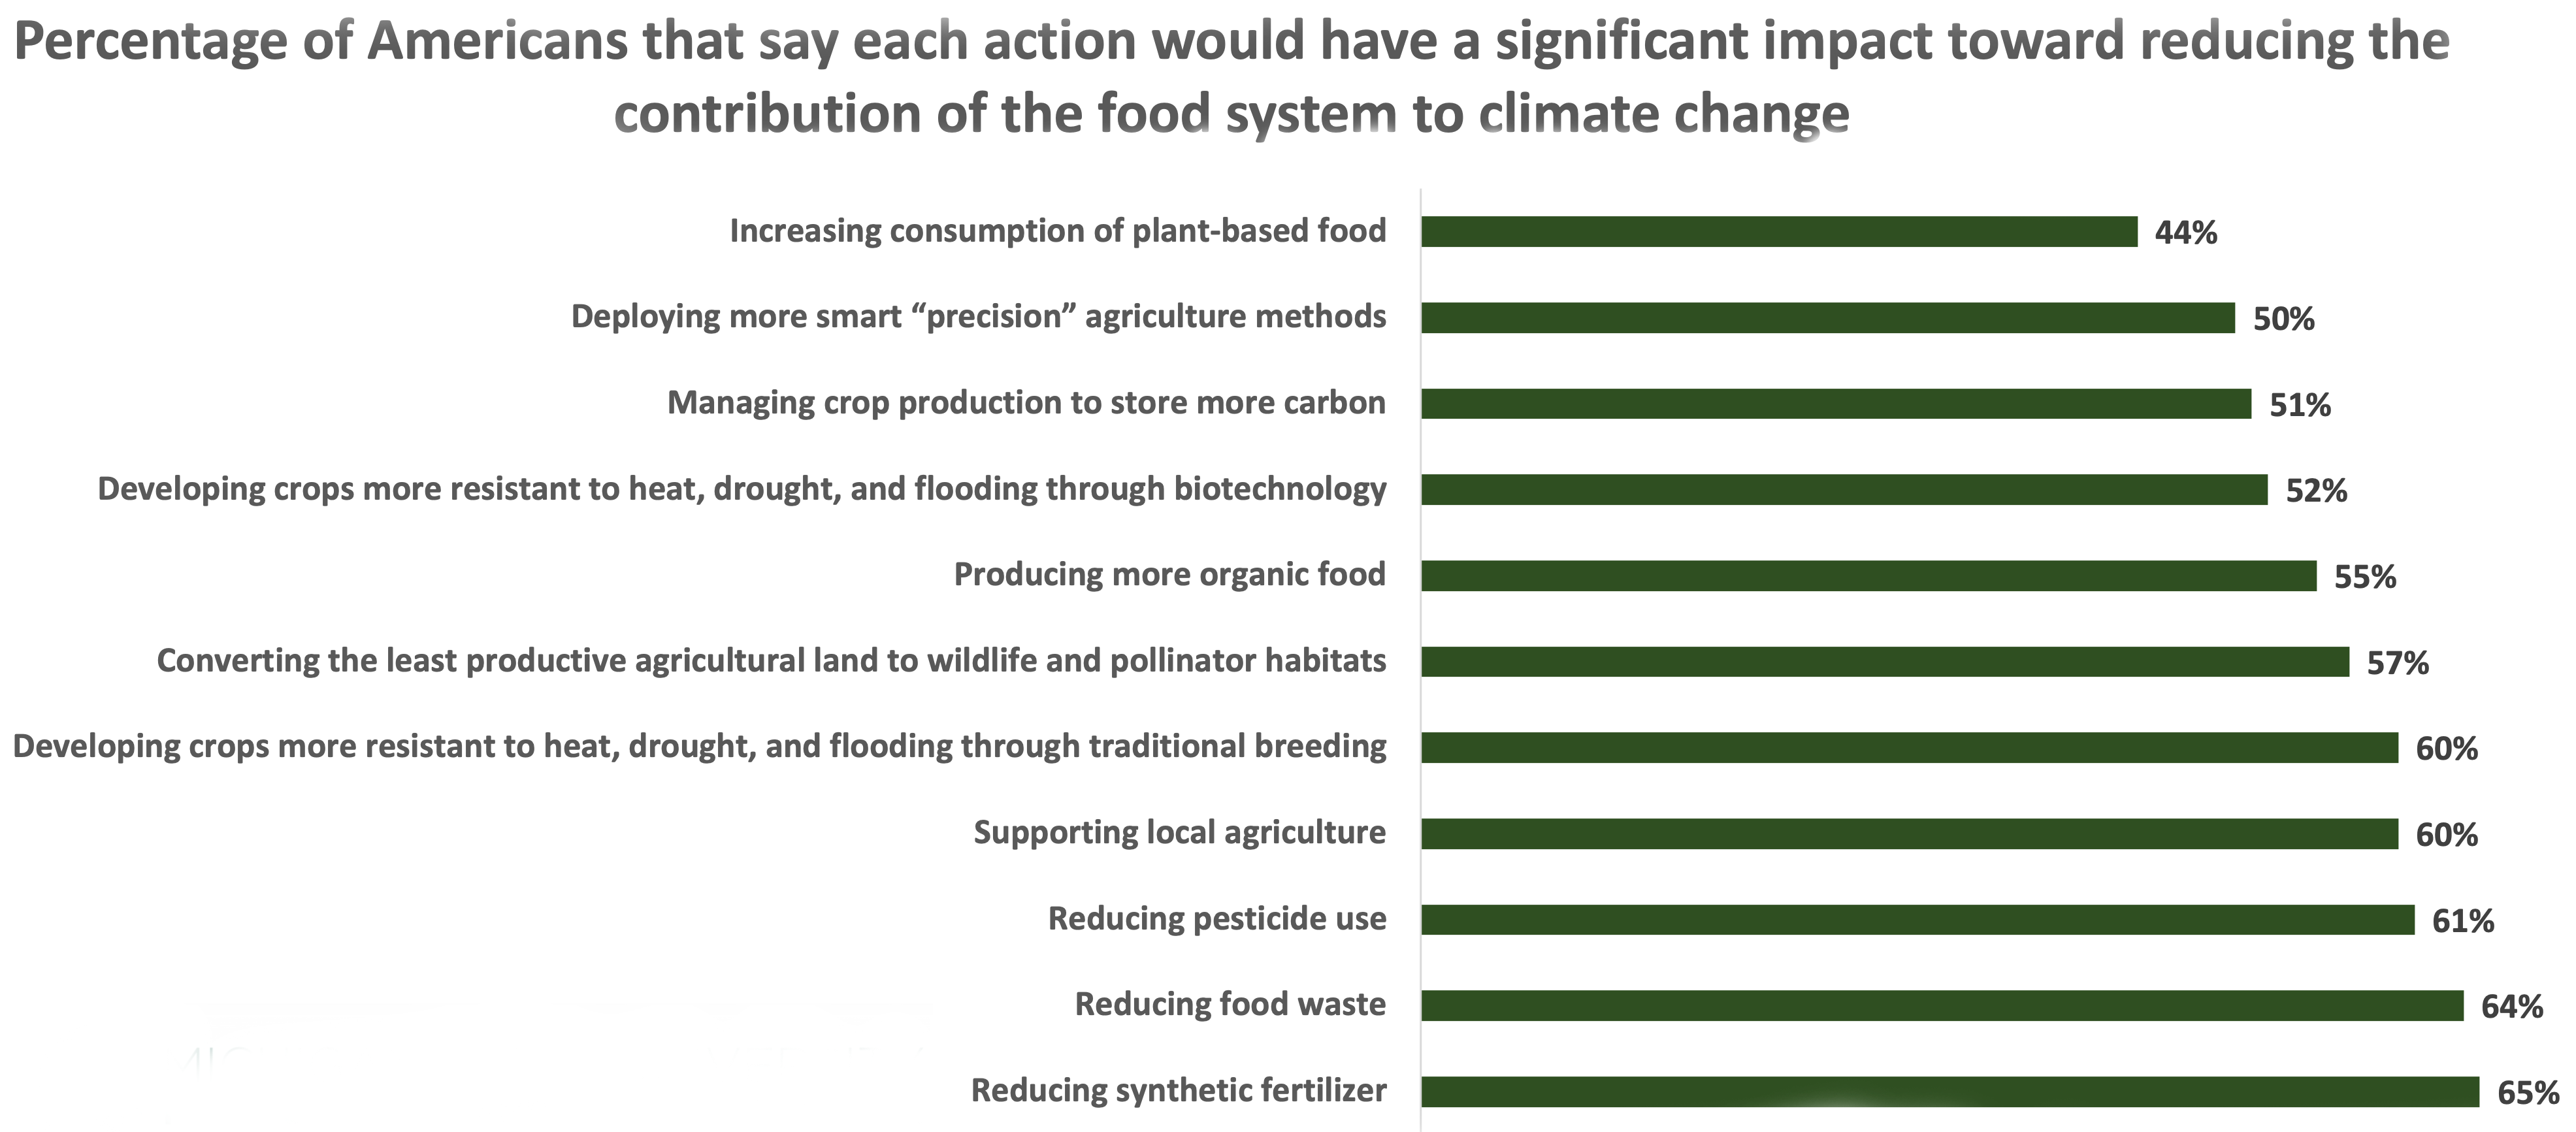 This chart shows the percentage of Americans who say each action would have a significant impact toward reducing the food systems' contribution to climate change. 65% said reducing synthetic fertilizer. 64% said reducing food waste. 61% said reducing pesticide use. 60% said supporting local agriculture. 60% said develop crops resistant to heat, drought and flooding through traditional breeding. 57% said converting the least productive agricultural land to wildlife and pollinator habitats. 55% said producing more organic food. 52% said developing more crops resistant to heat, drought and flooding through biotechnology. 51% said managing crop production to store more carbon. 50% said deploying more precision agriculture methods. Lastly, 44% said increasing consumption of plant-based foods.